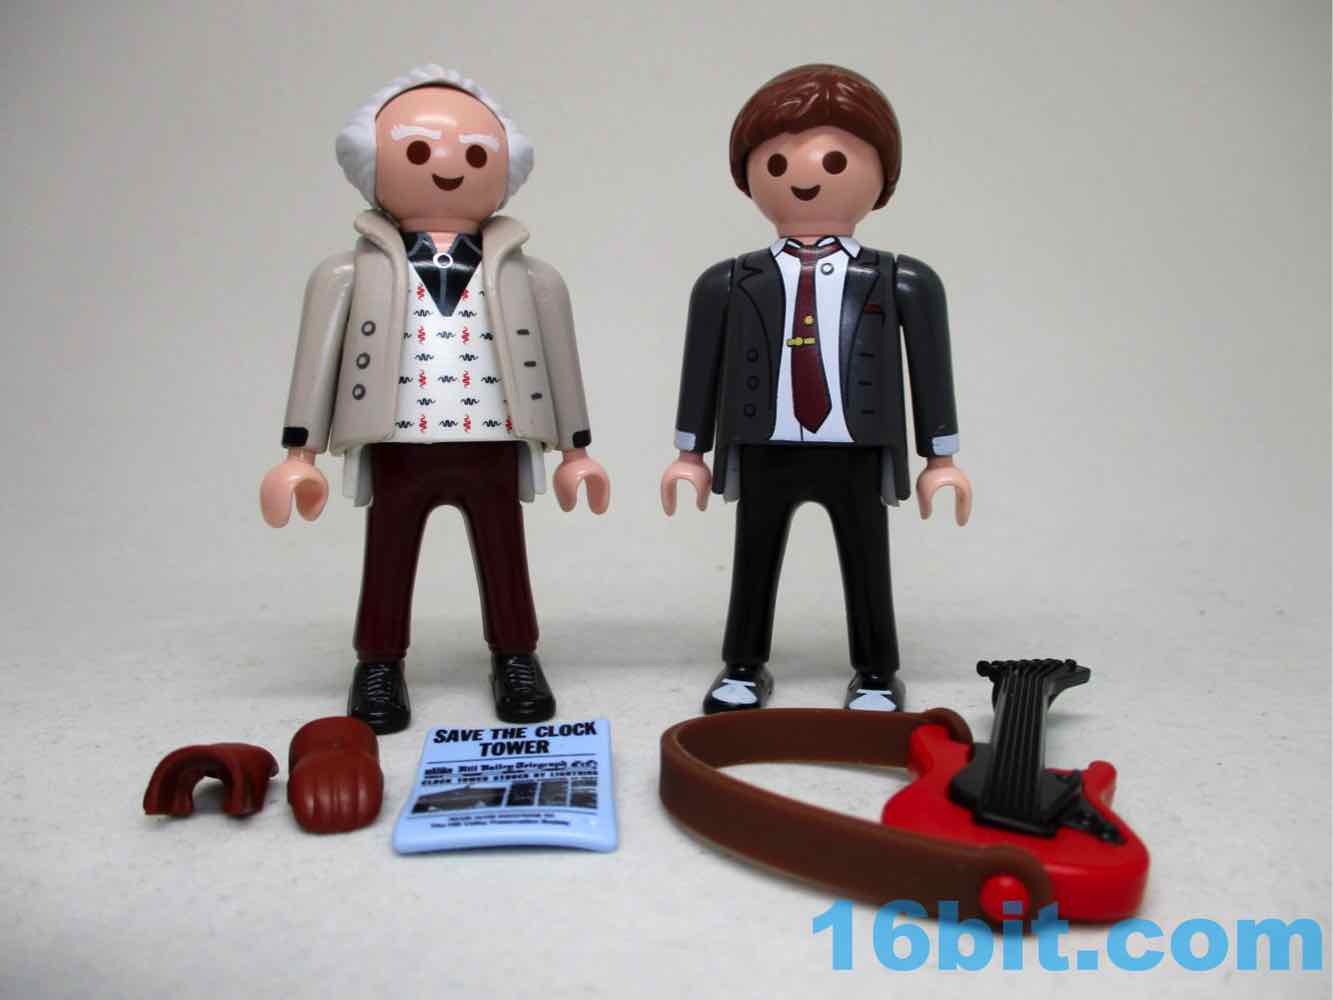 Playmobil,BACK TO THE FUTURE,DR EMMETT BROWN